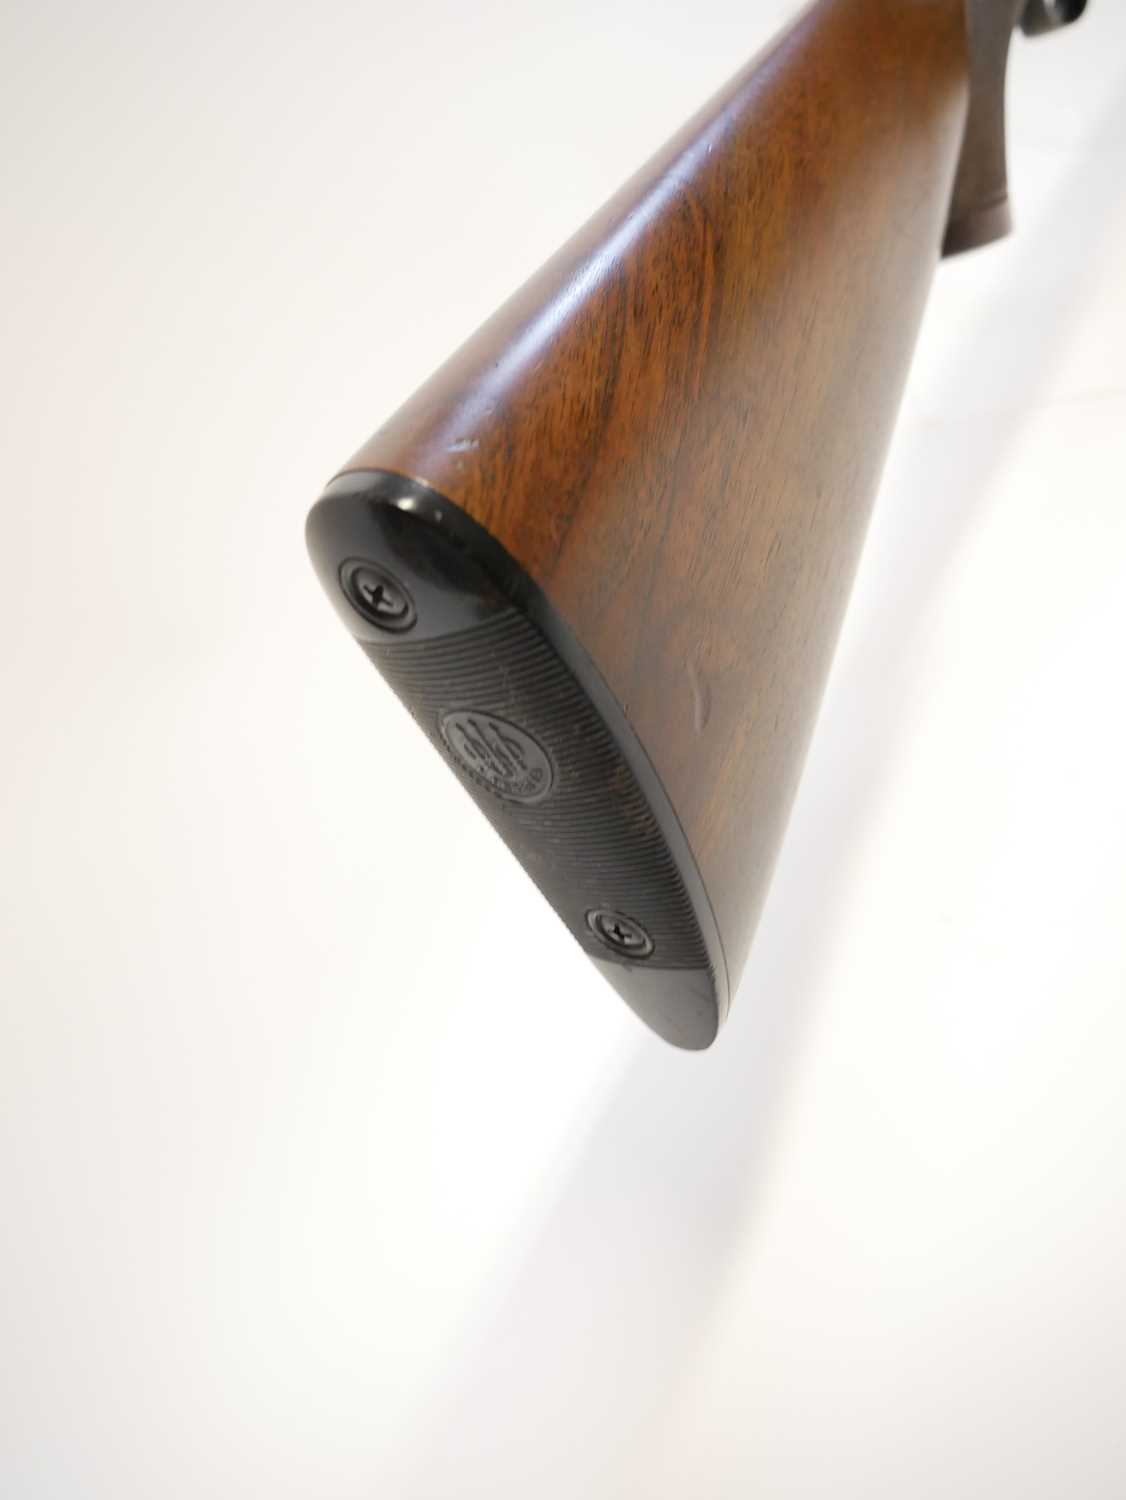 Beretta 12 bore side by side Model 626E shotgun, serial number A40366A, 28inch barrels with half and - Image 4 of 15